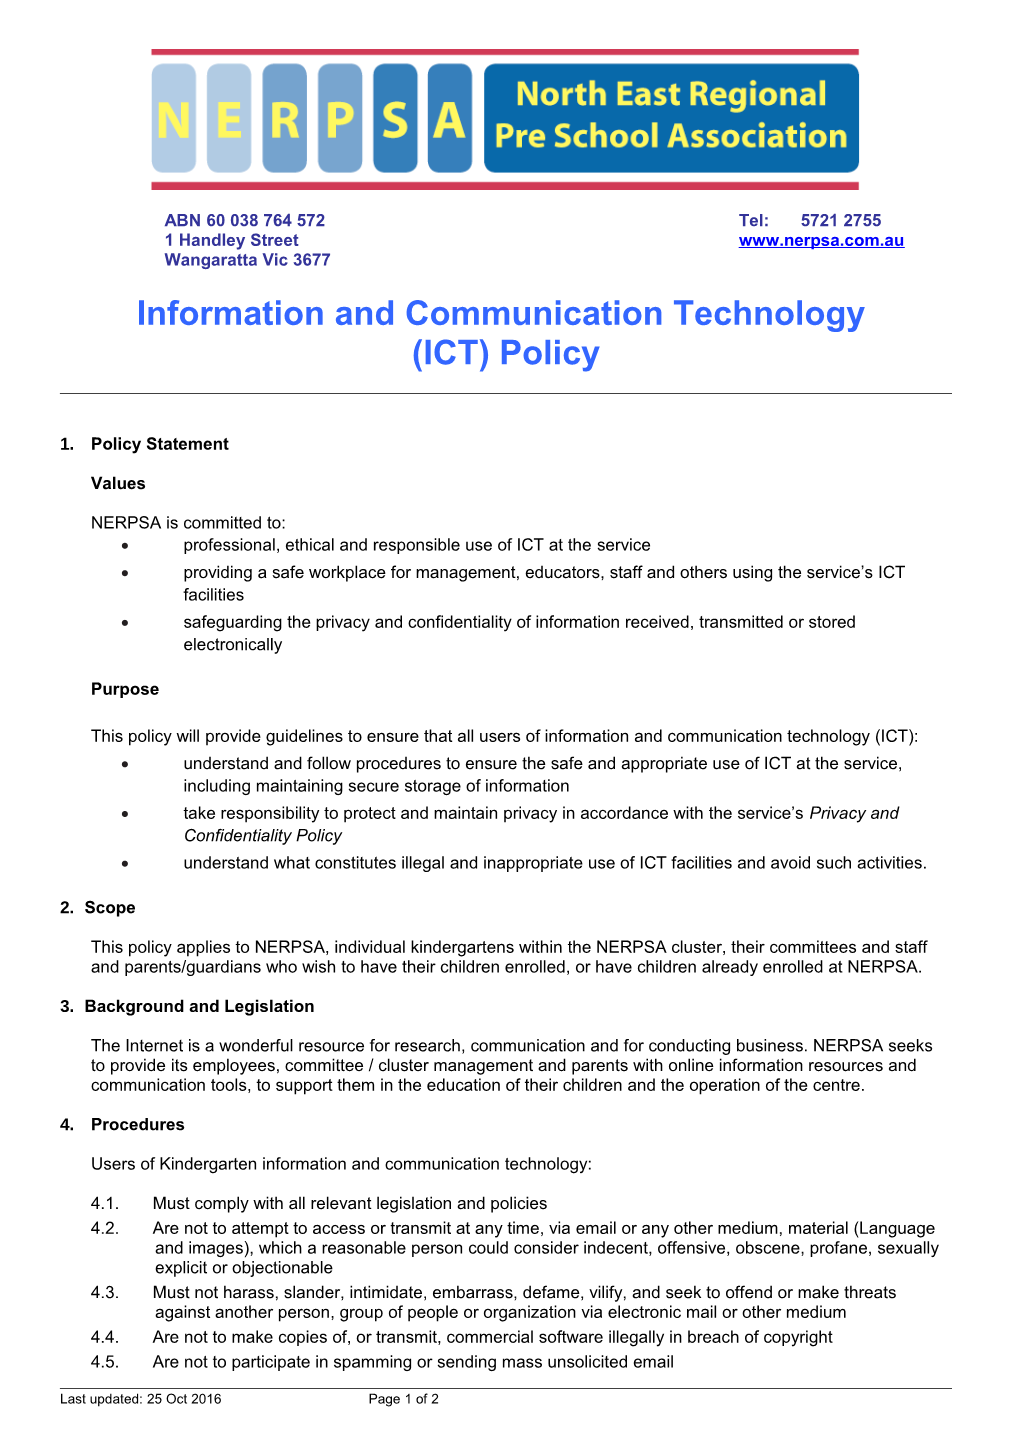 NERPSA Information and Communication (ICT) Policy